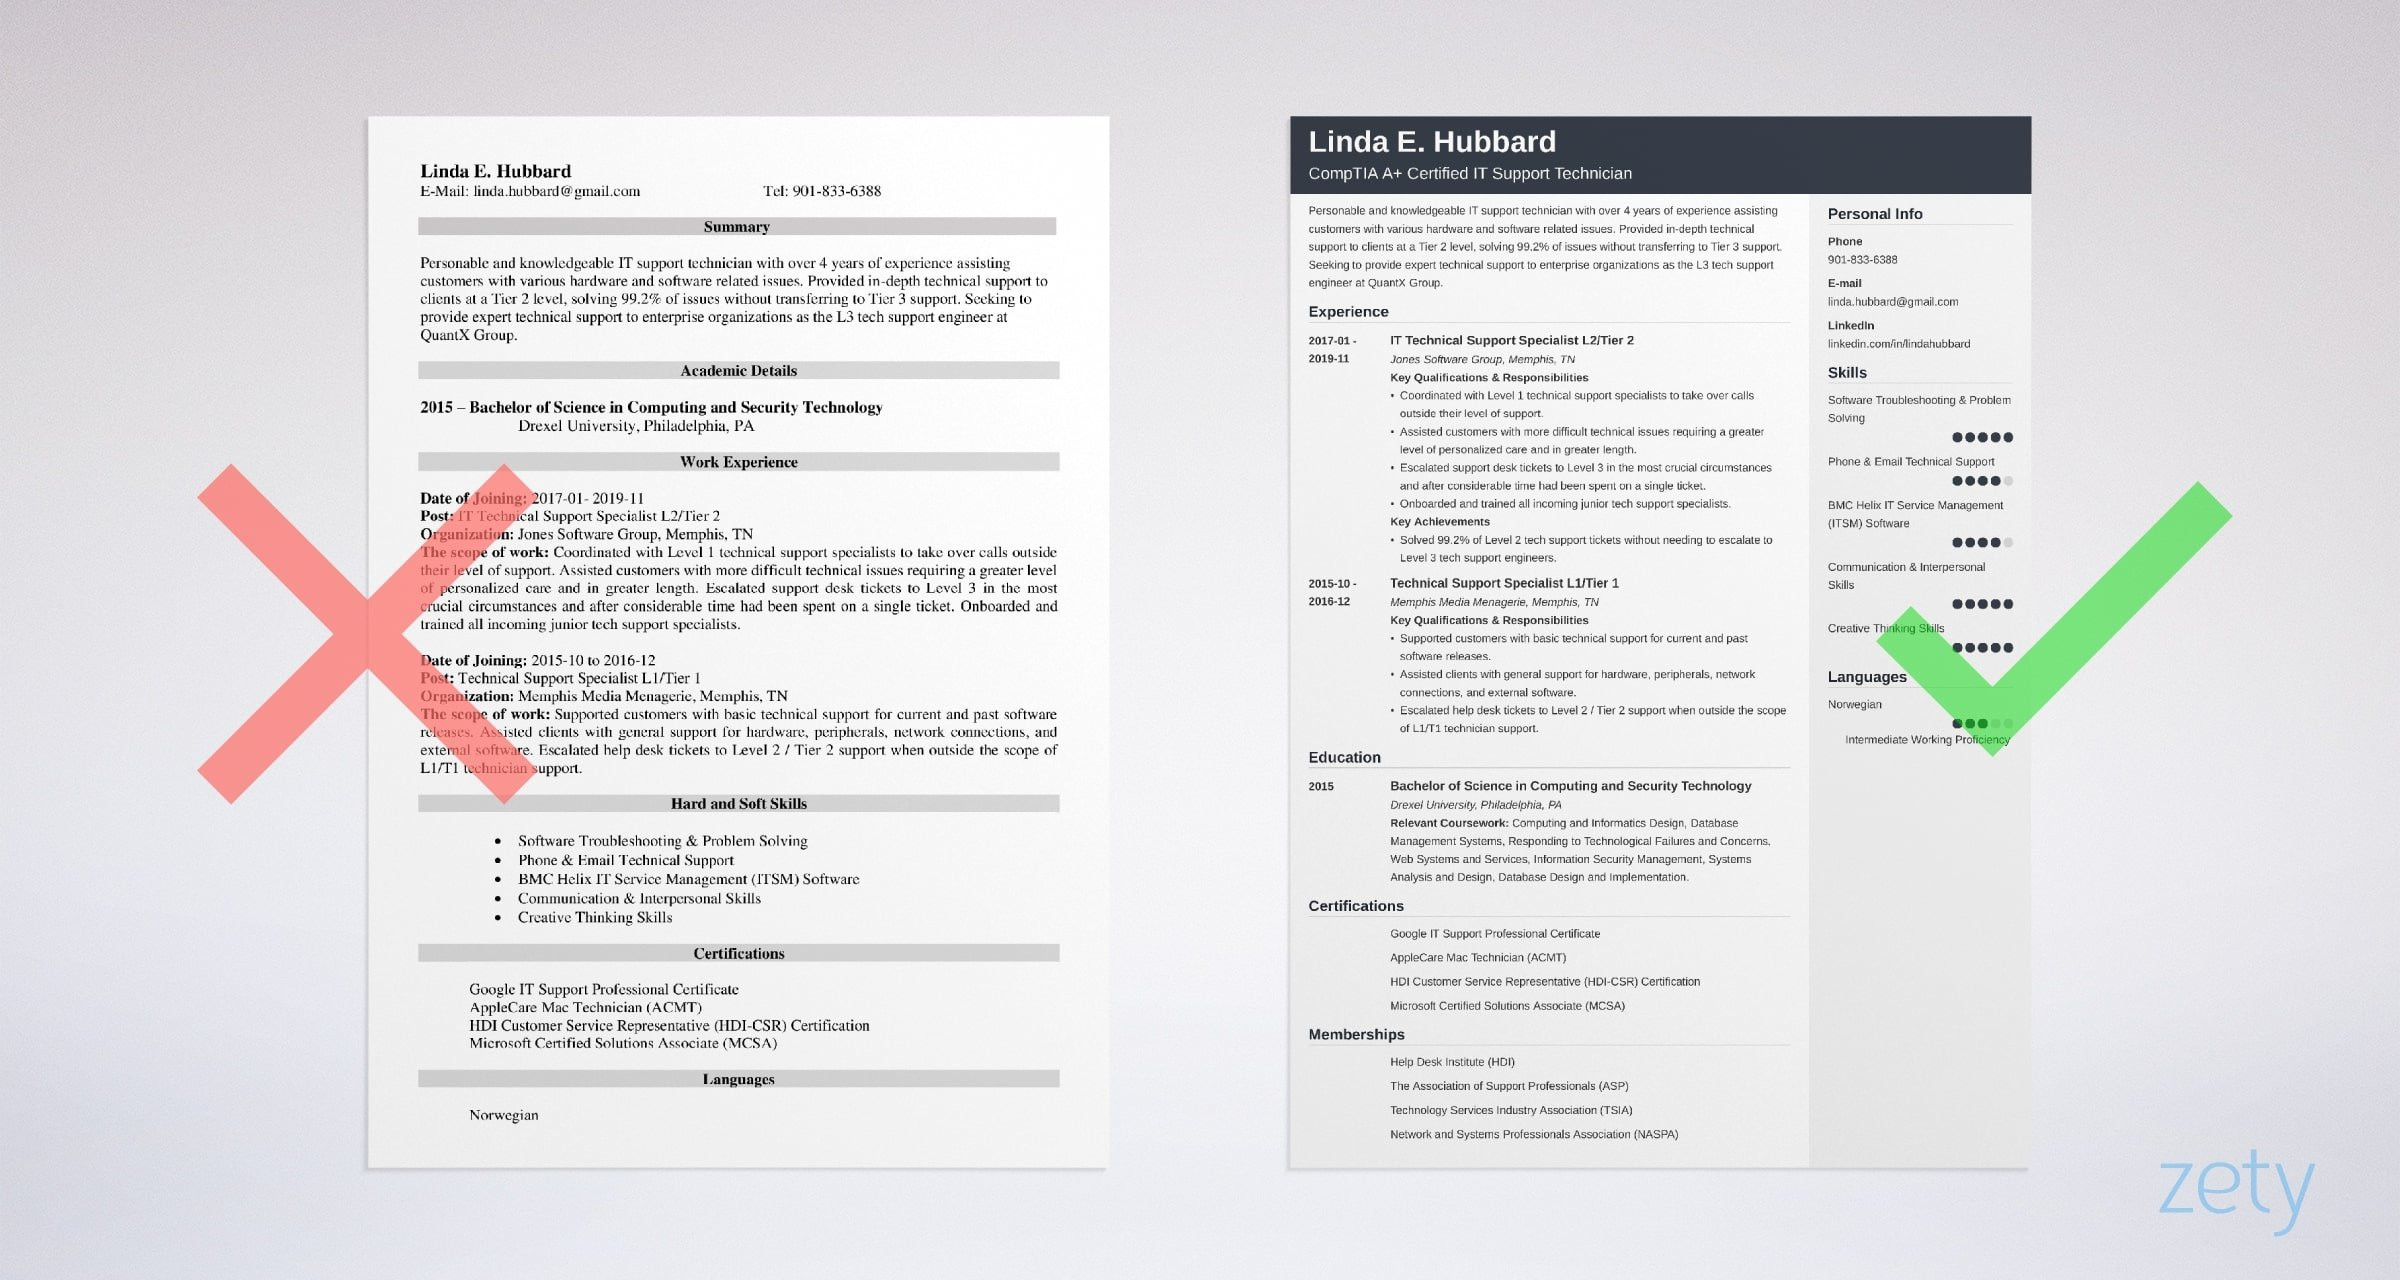 Technical Support Resume Samples for Freshers Technical Support Resume Sample & Job Description [20 Tips]